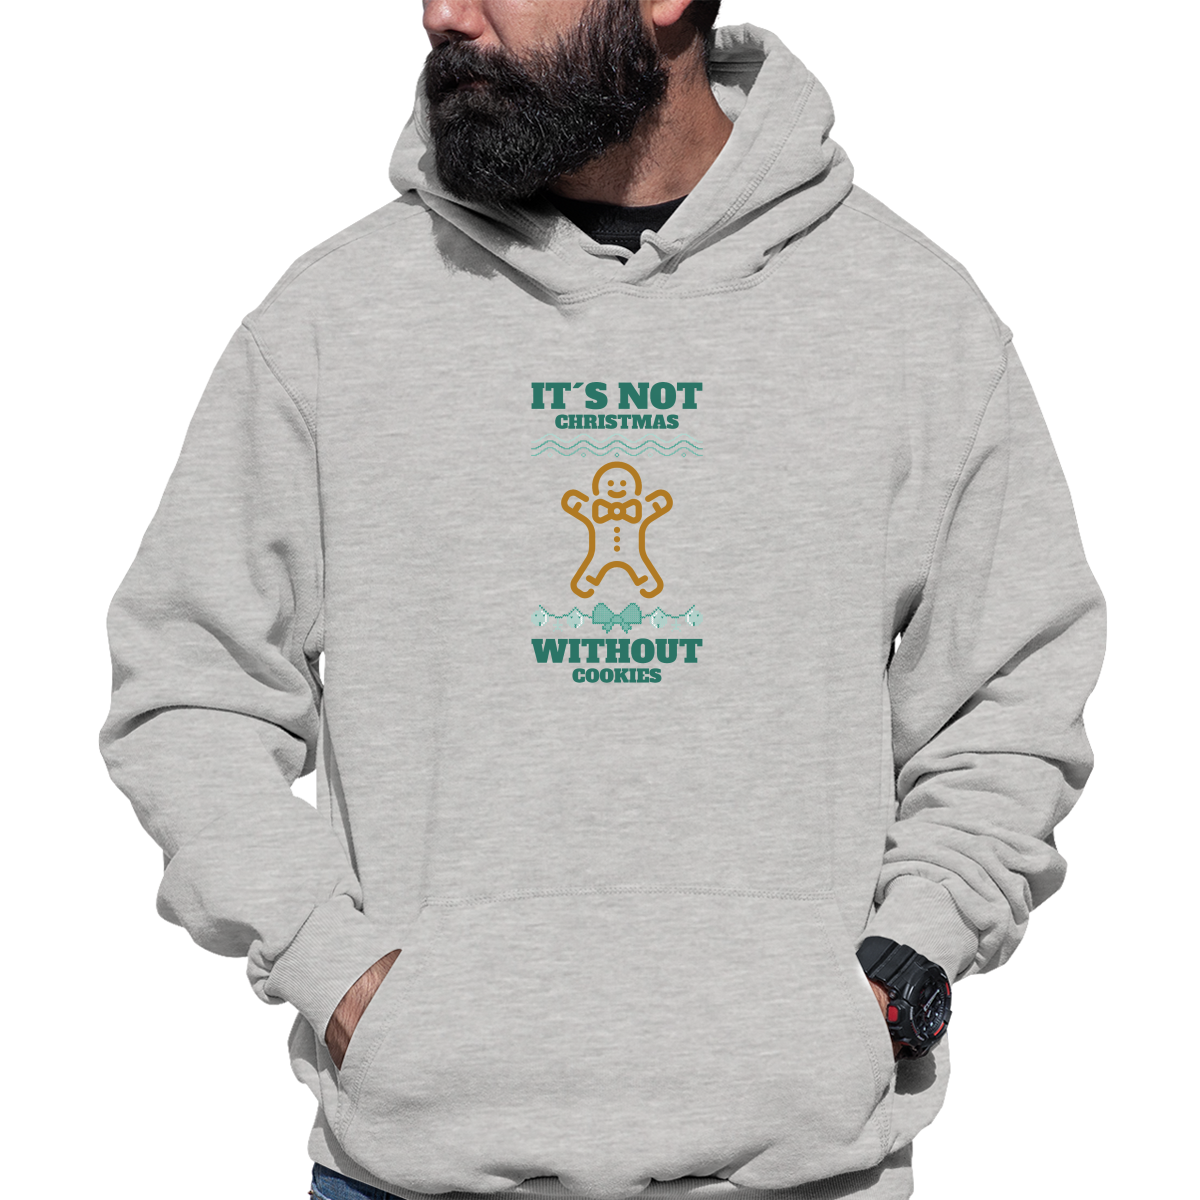 It's Not Christmas Without Cookies Unisex Hoodie | Gray